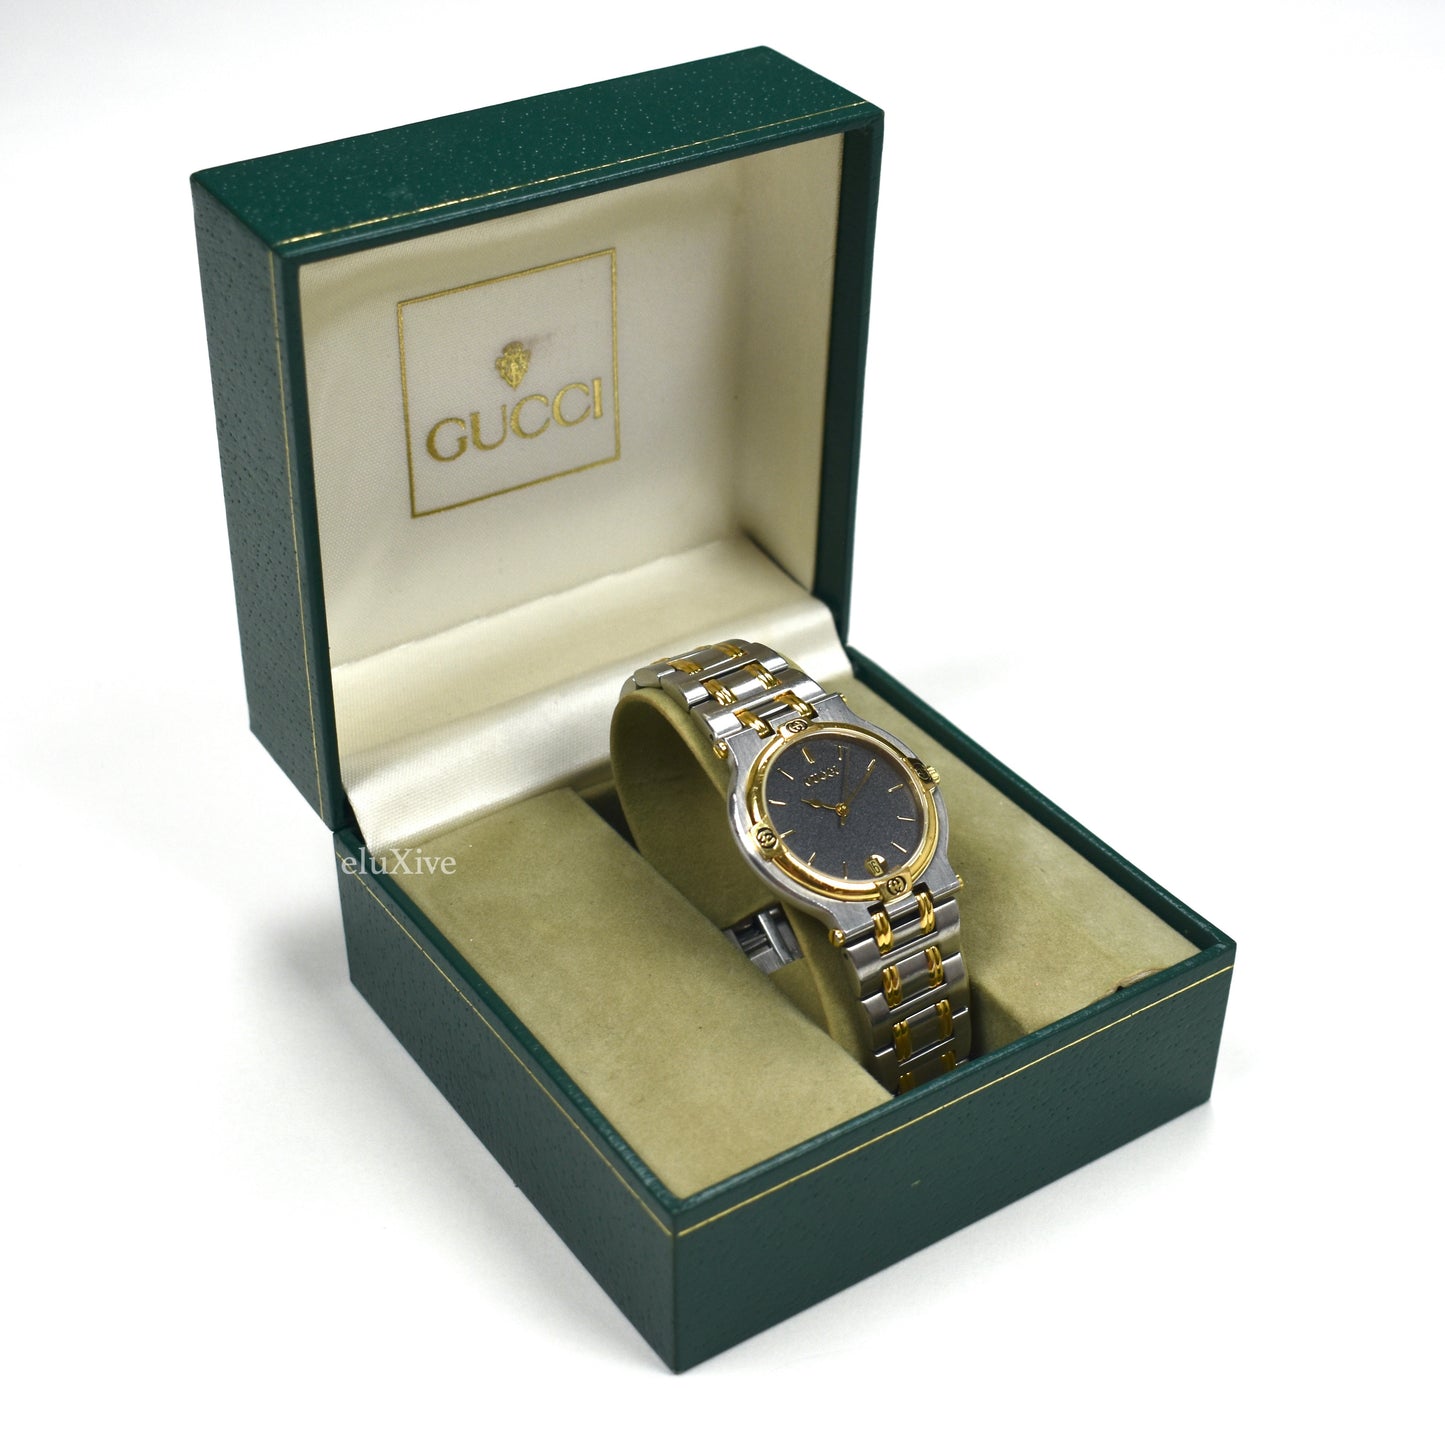 Gucci - 9000M Gold / Steel Graphite Dial Watch (Solid Links)